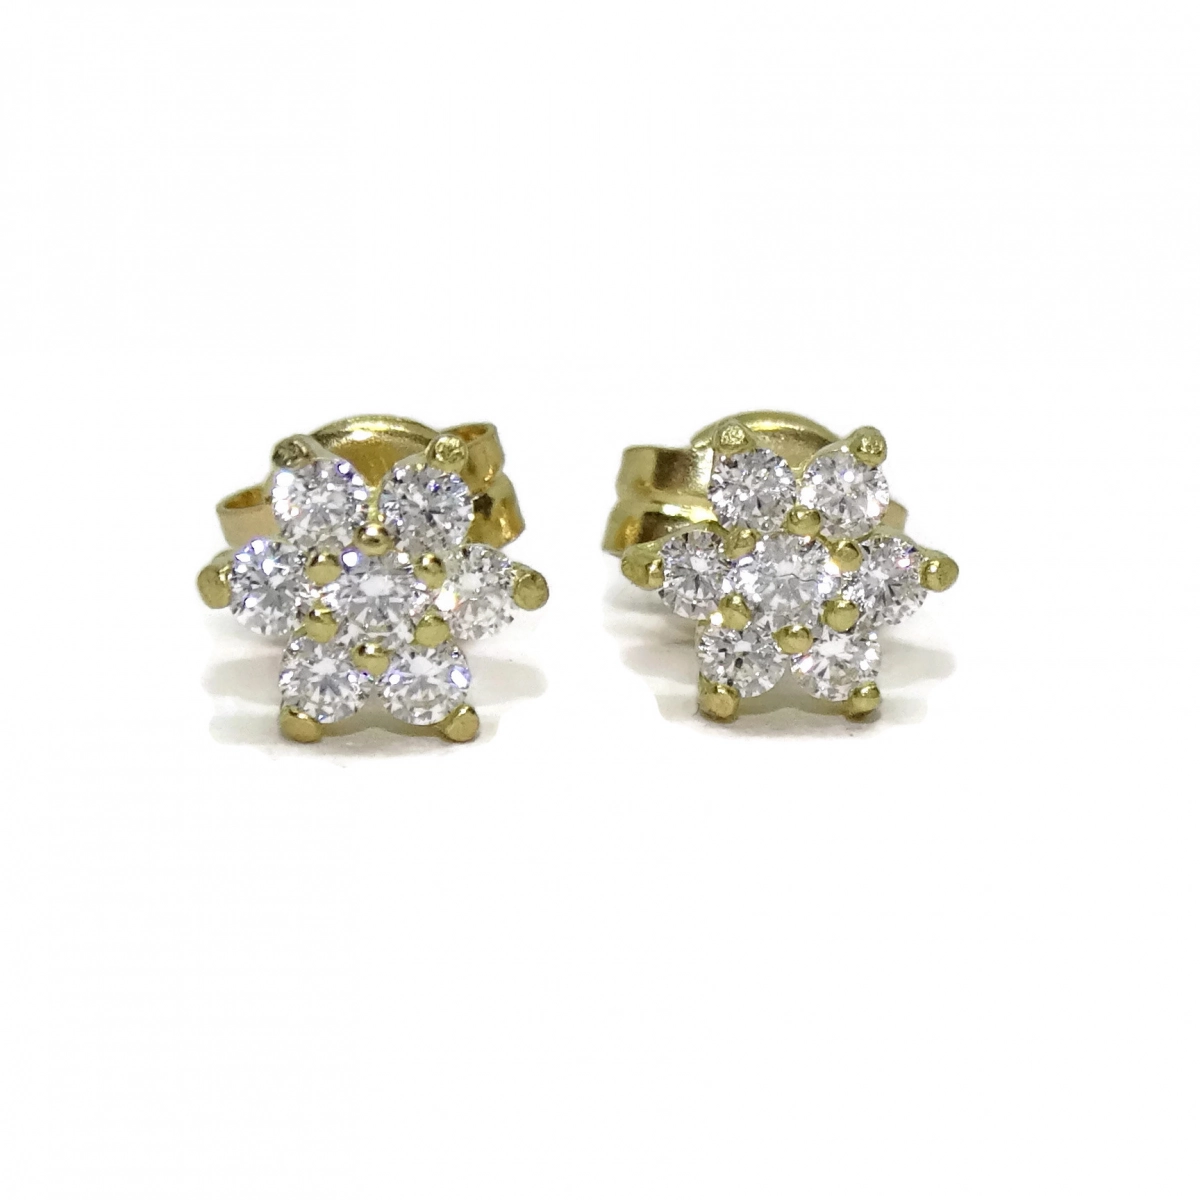 EARRING ROSETON YELLOW GOLD 18KTES AND ZIRCONS SPECIAL COMMUNION! NEVER SAY NEVER